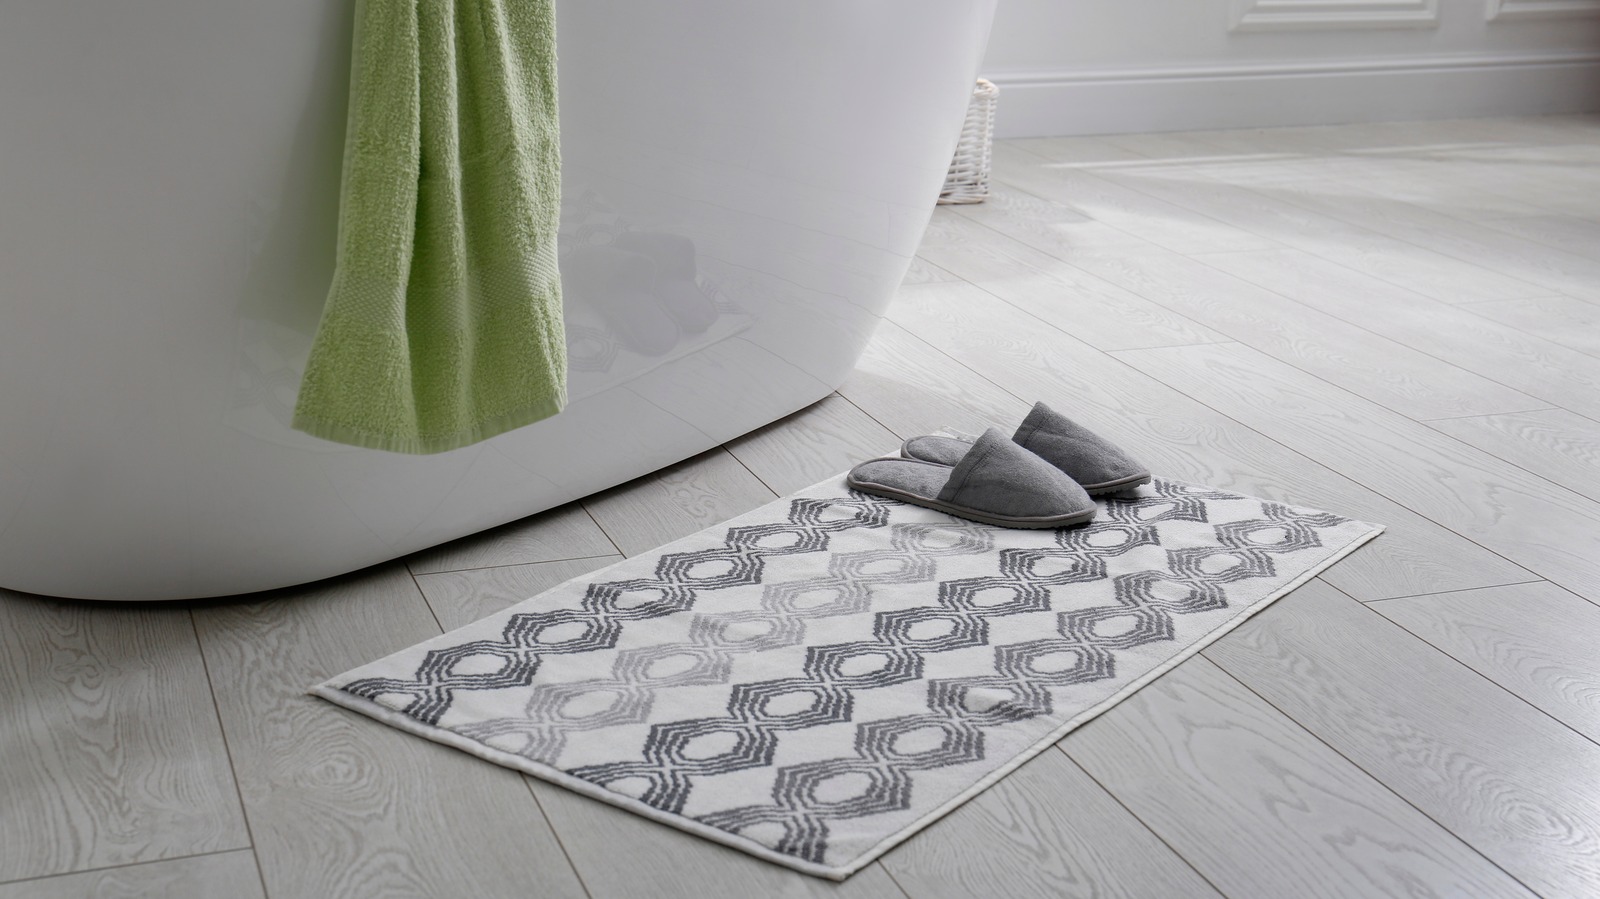 https://www.housedigest.com/img/gallery/you-might-want-to-think-twice-before-putting-a-rug-in-your-bathroom/l-intro-1694439882.jpg